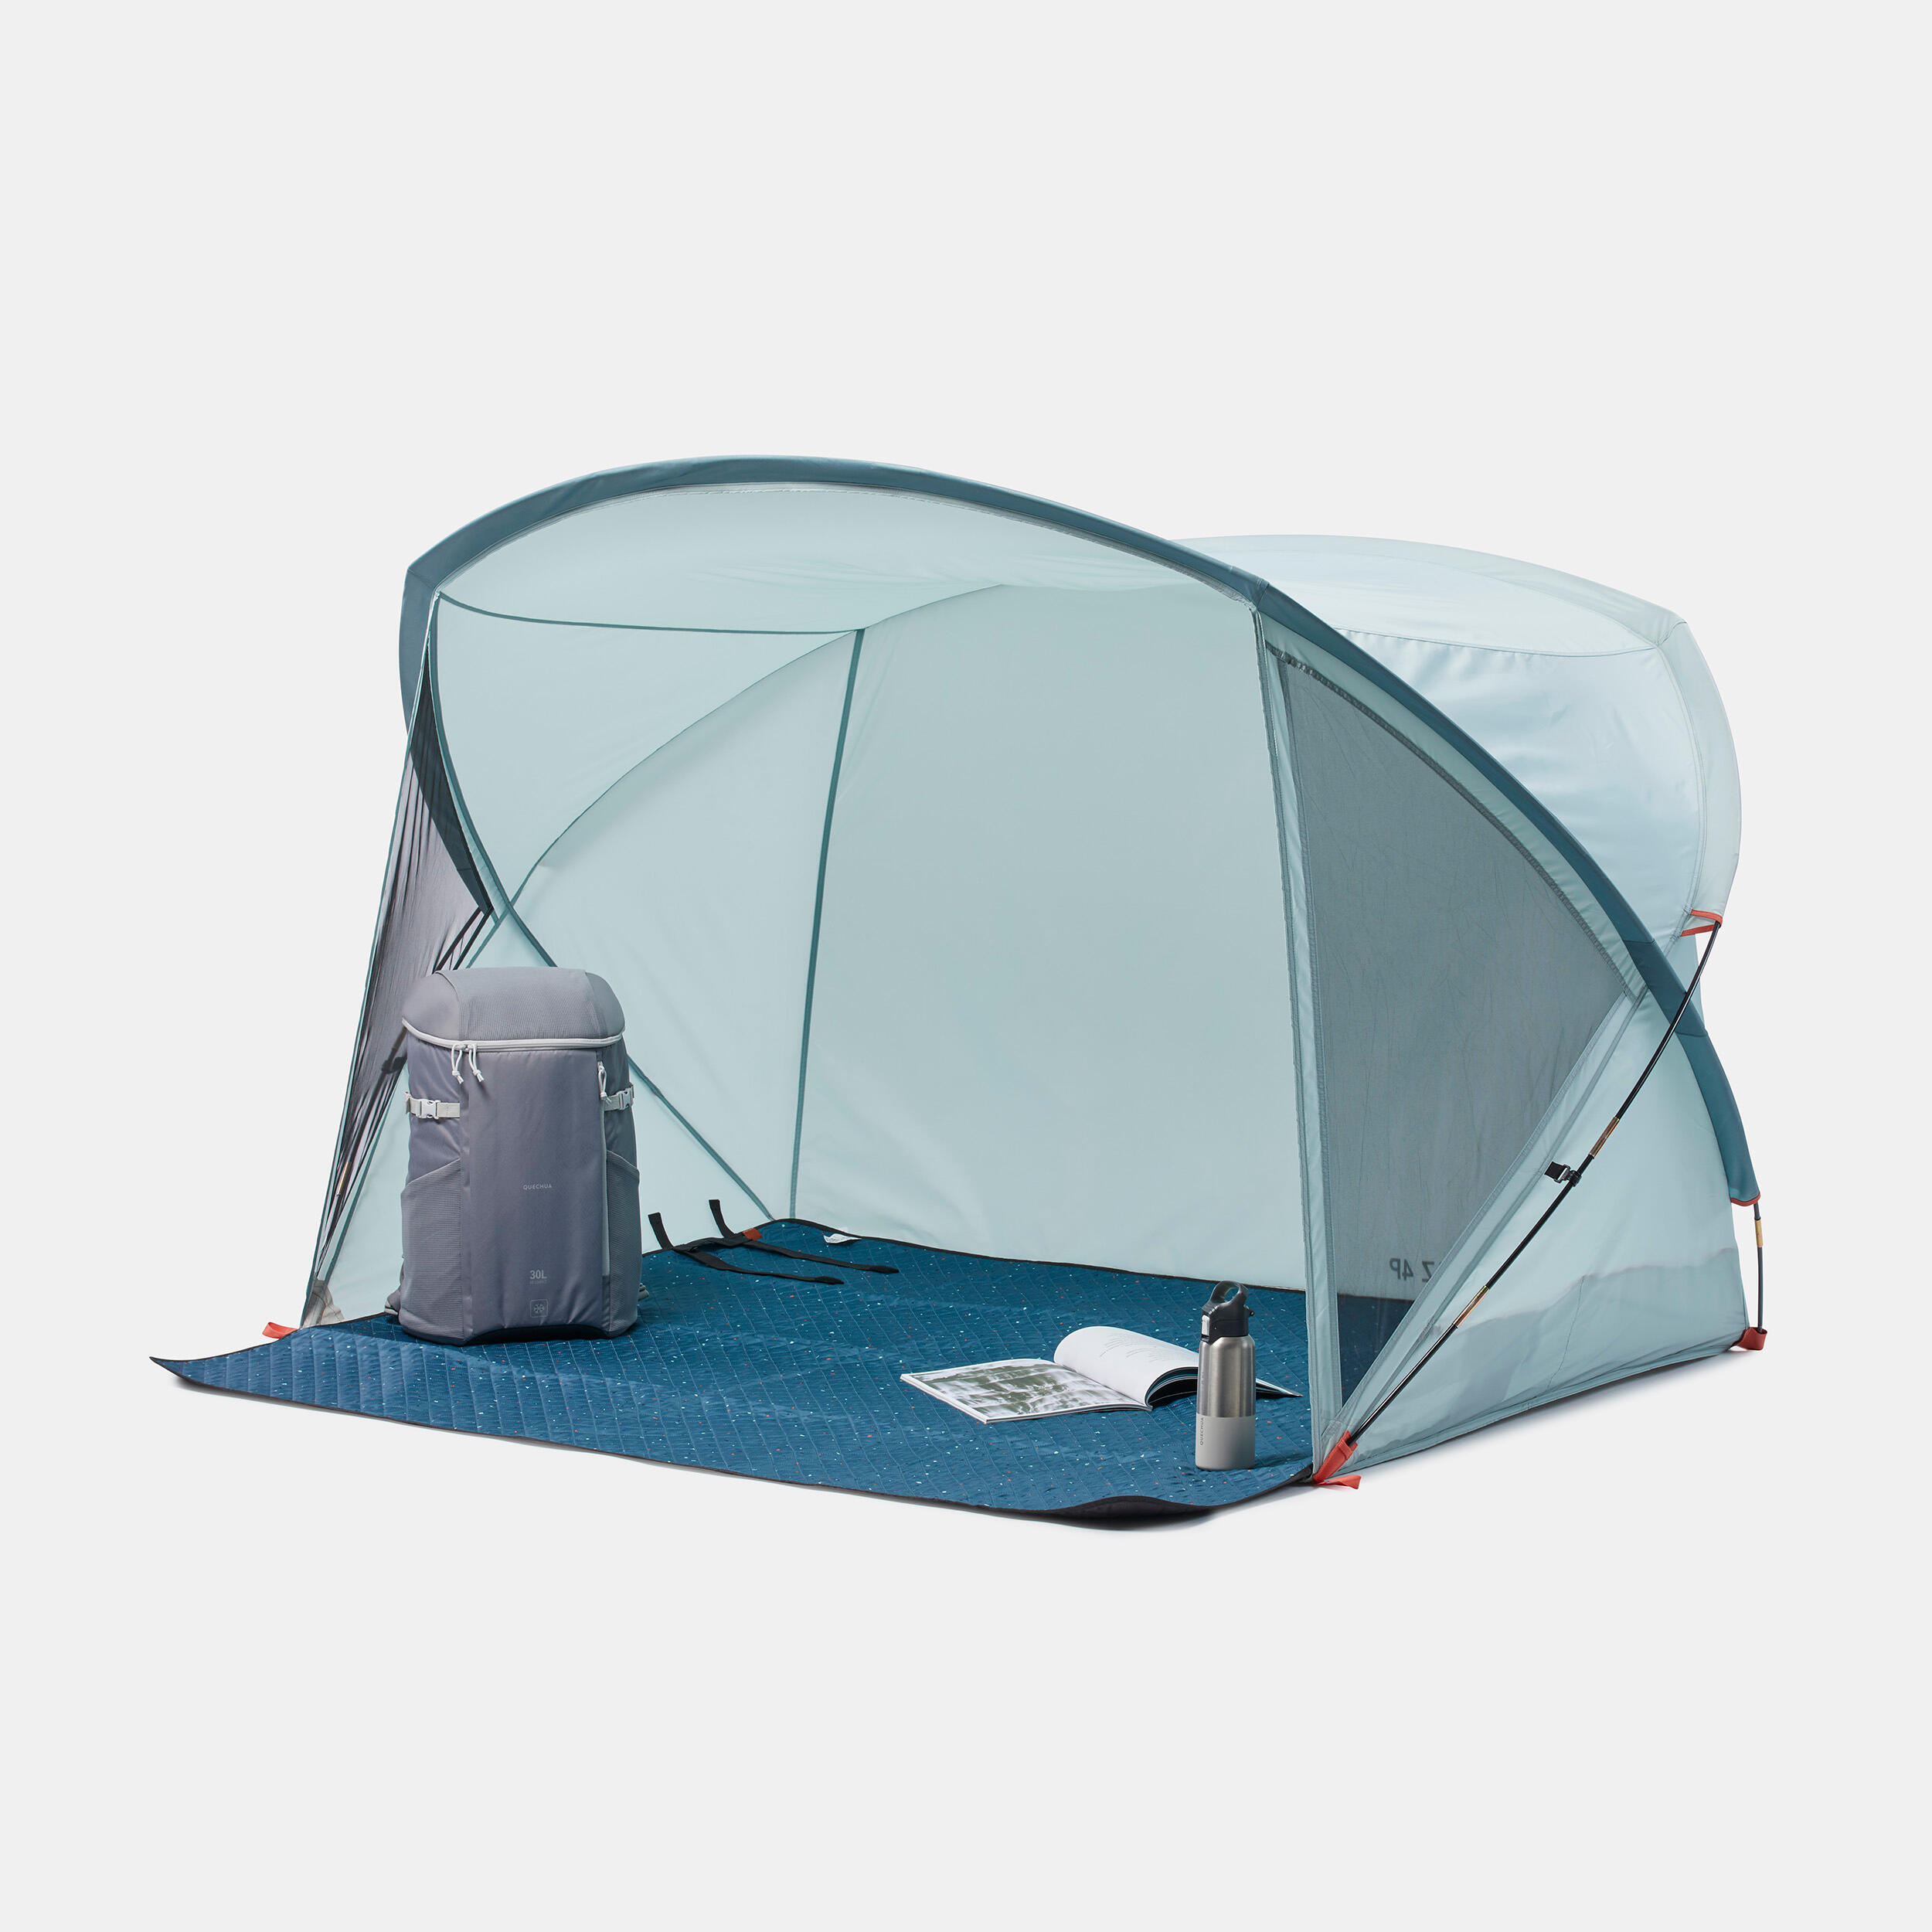 Camping Shelter with Poles - 4 person - Arpenaz 4P 3/10